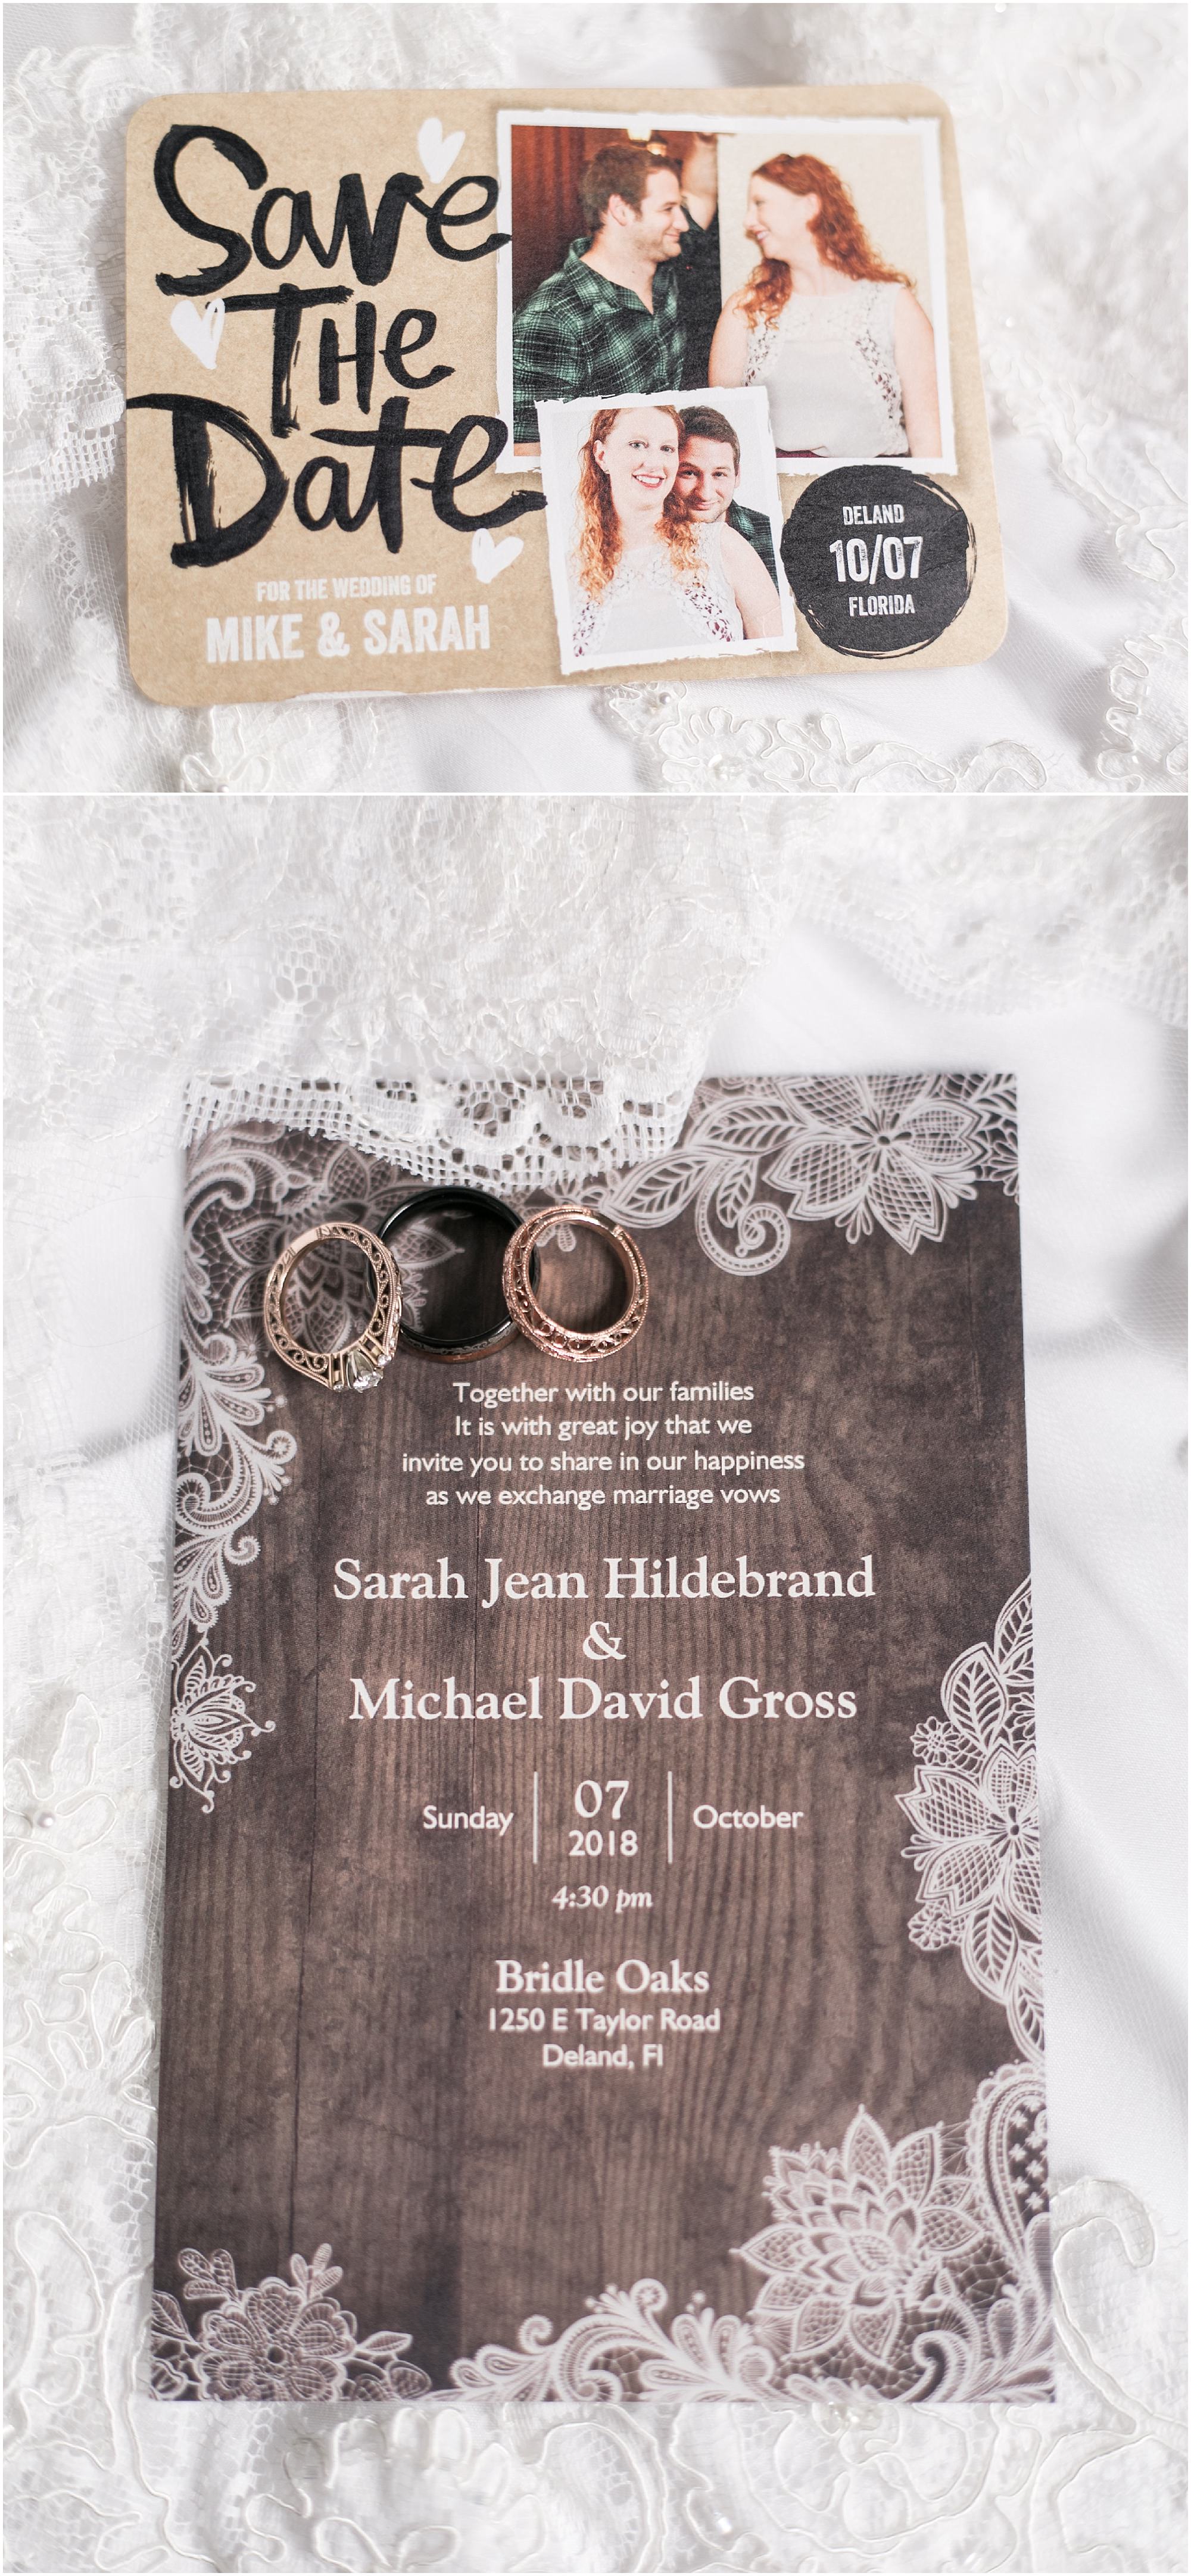 Save the Date and Wedding invitation sitting on top of lace